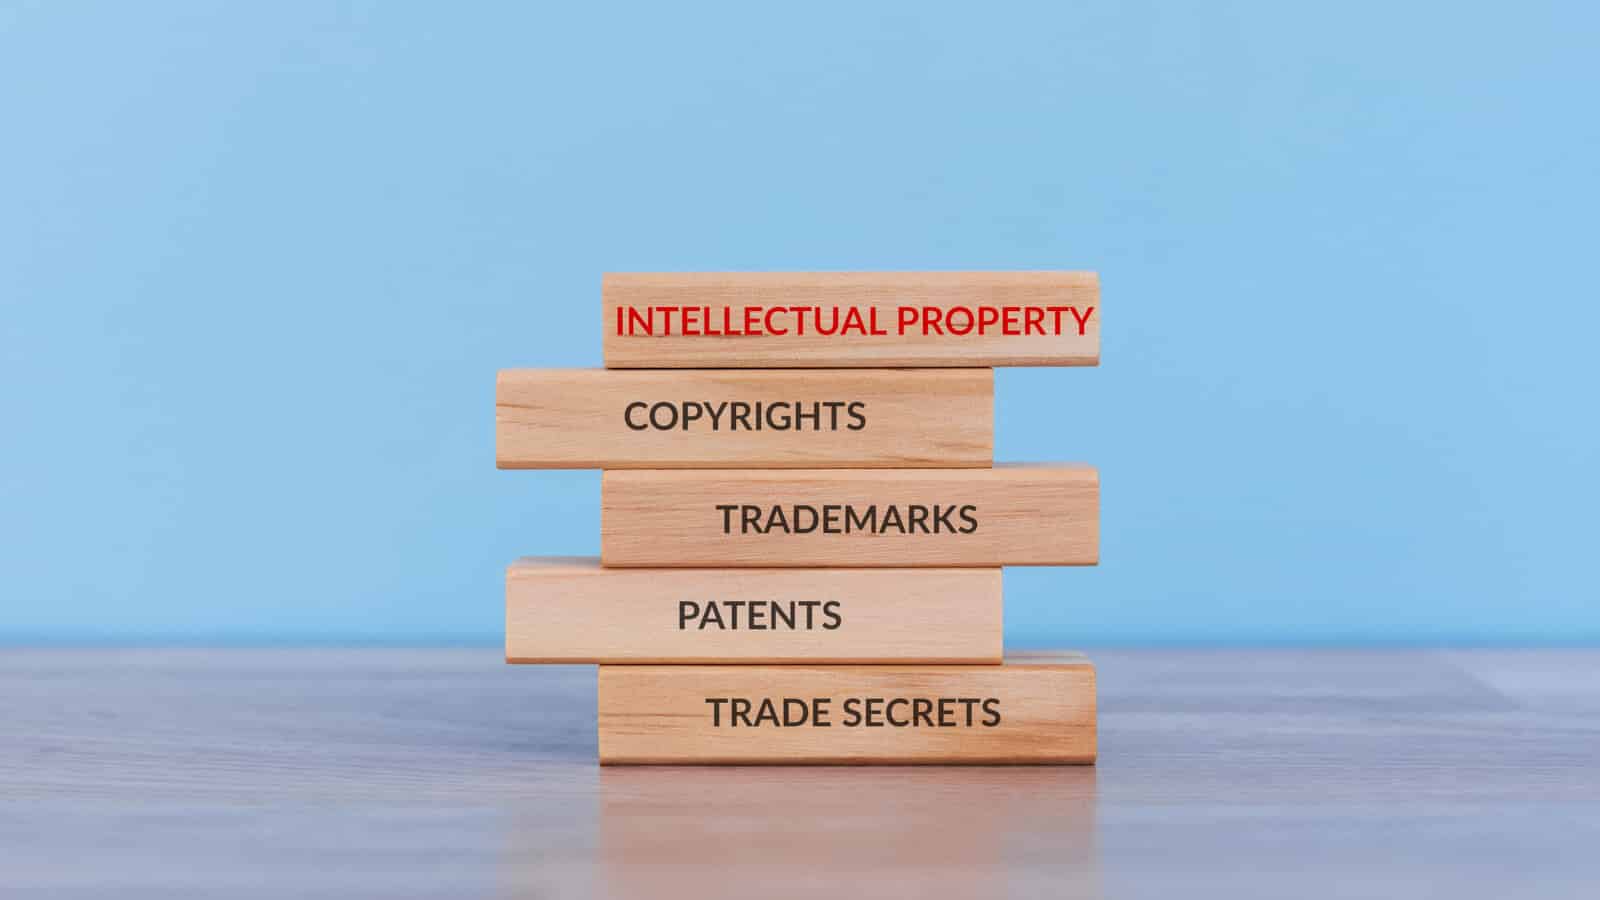 A stock-take of your IP and intangible assets is a no-brainer